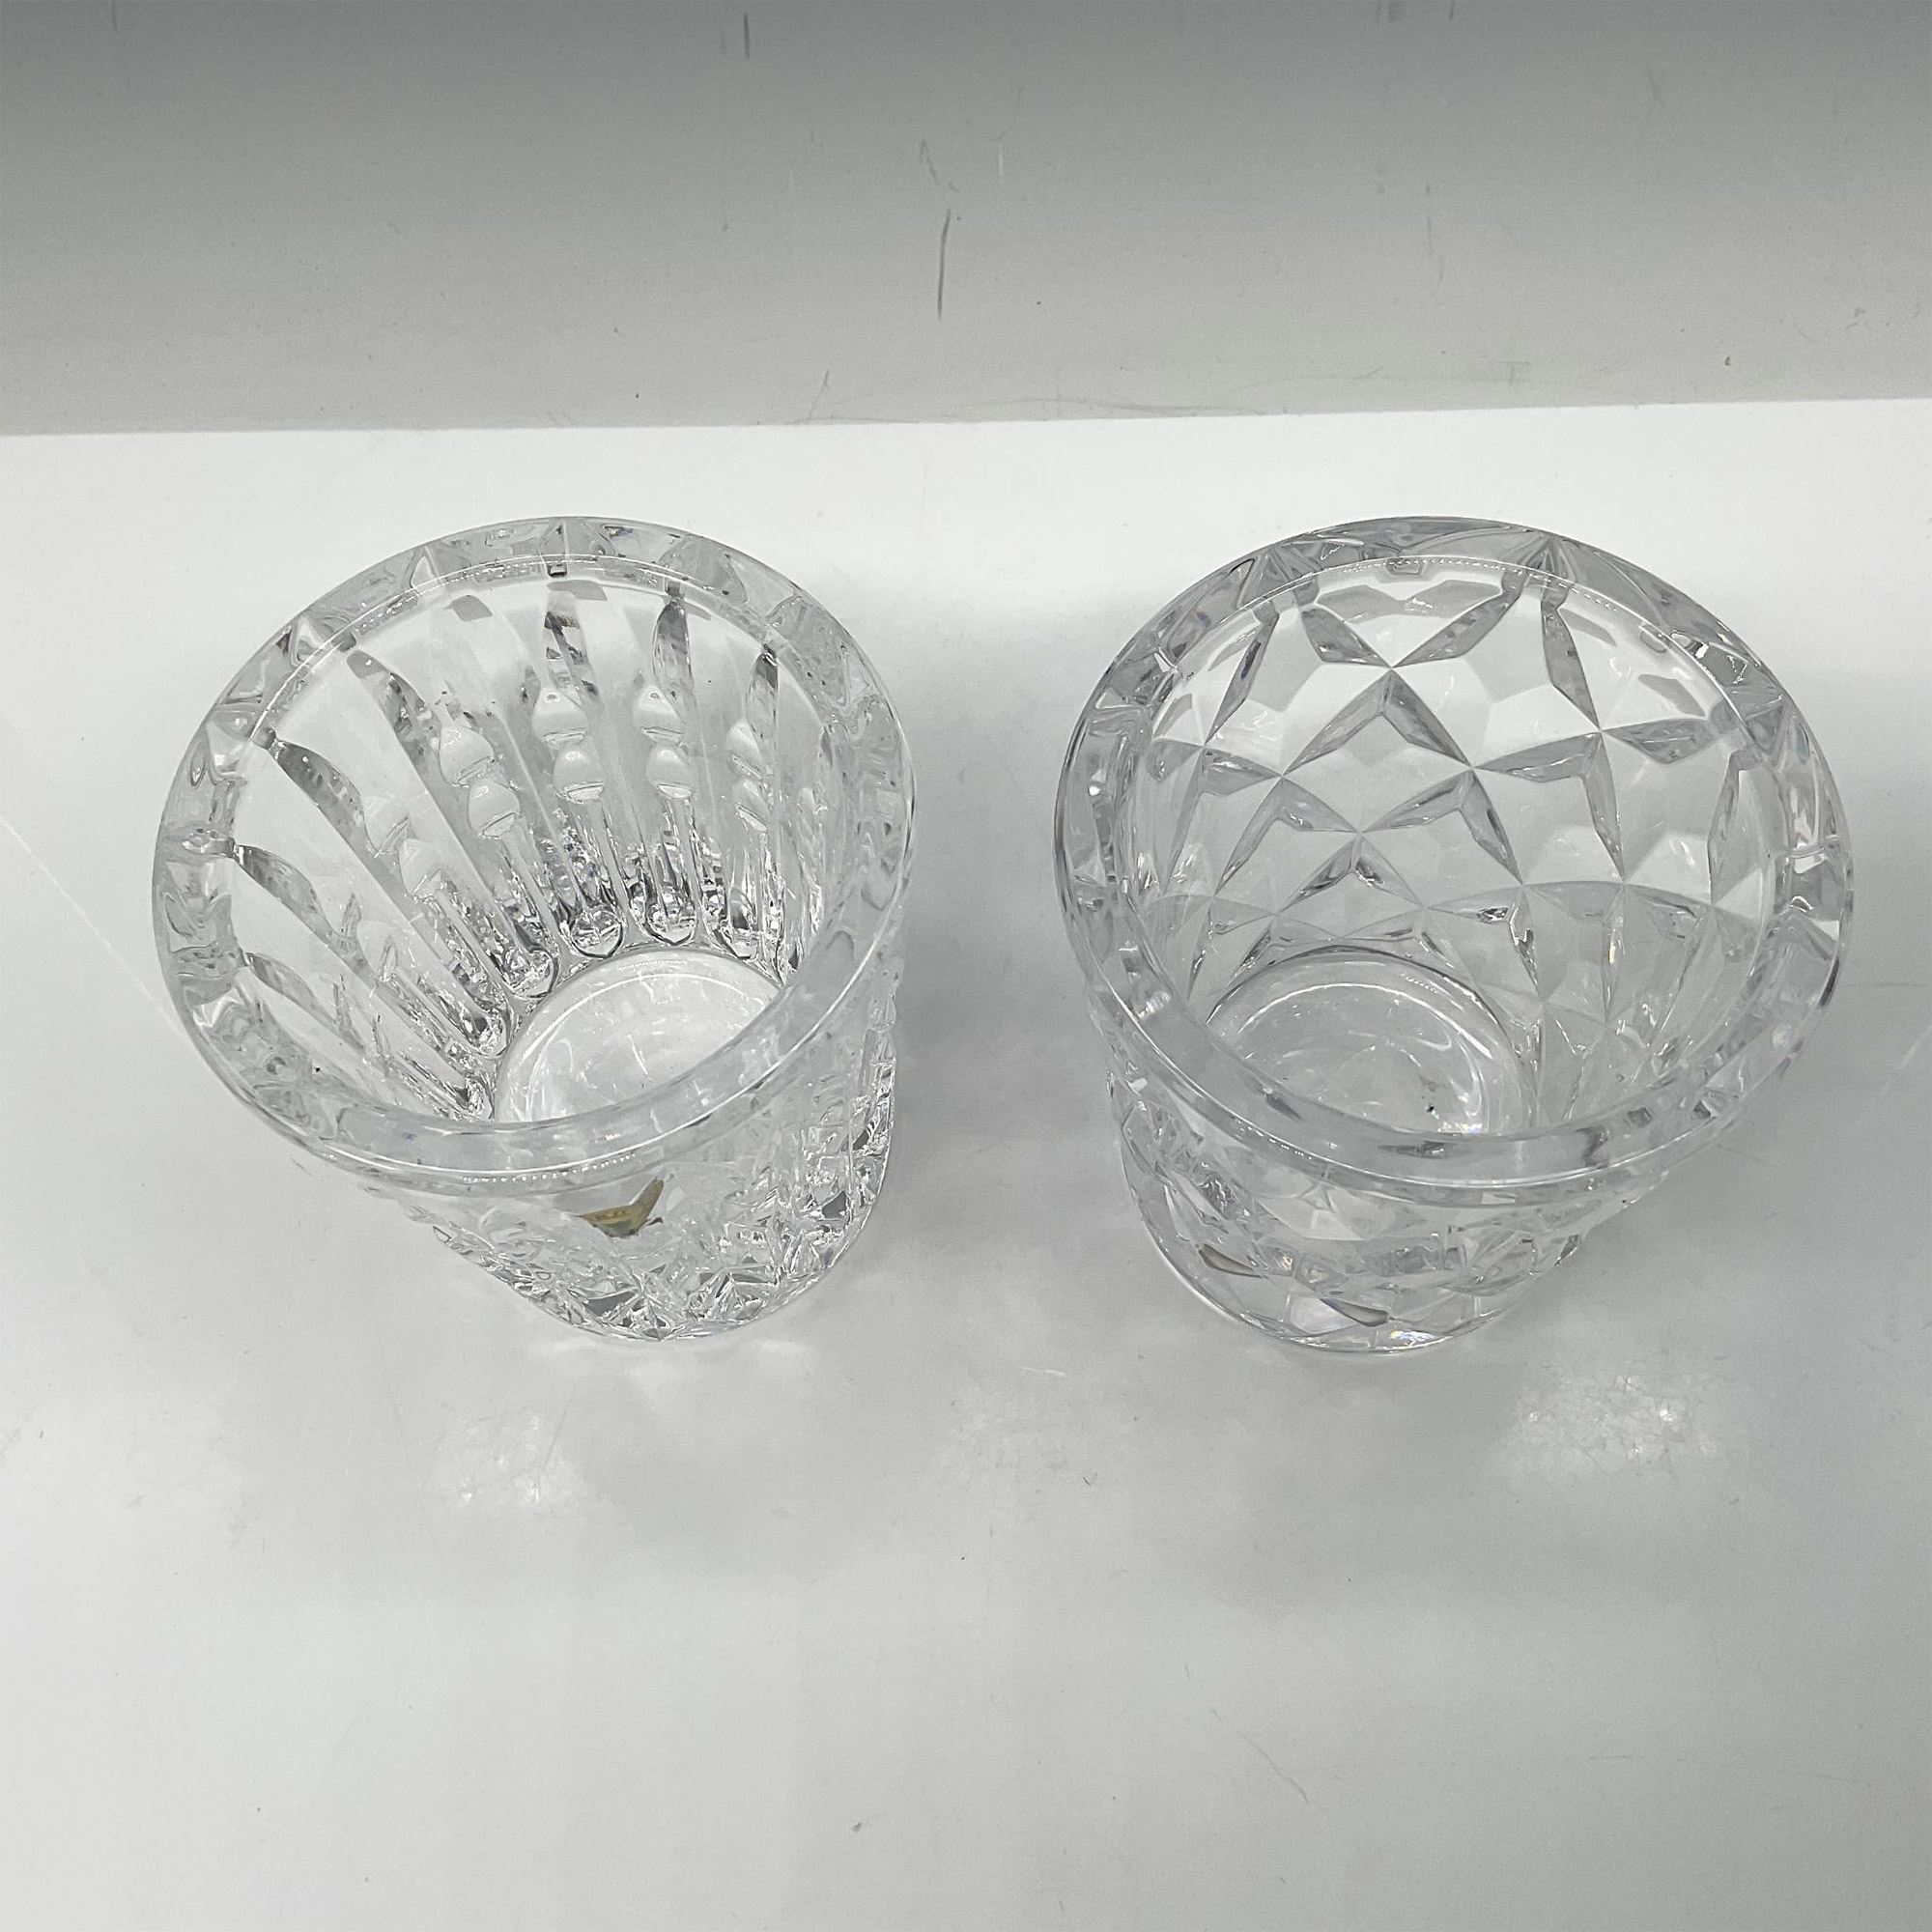 2pc Waterford Cut Crystal Tumblers - Image 2 of 3